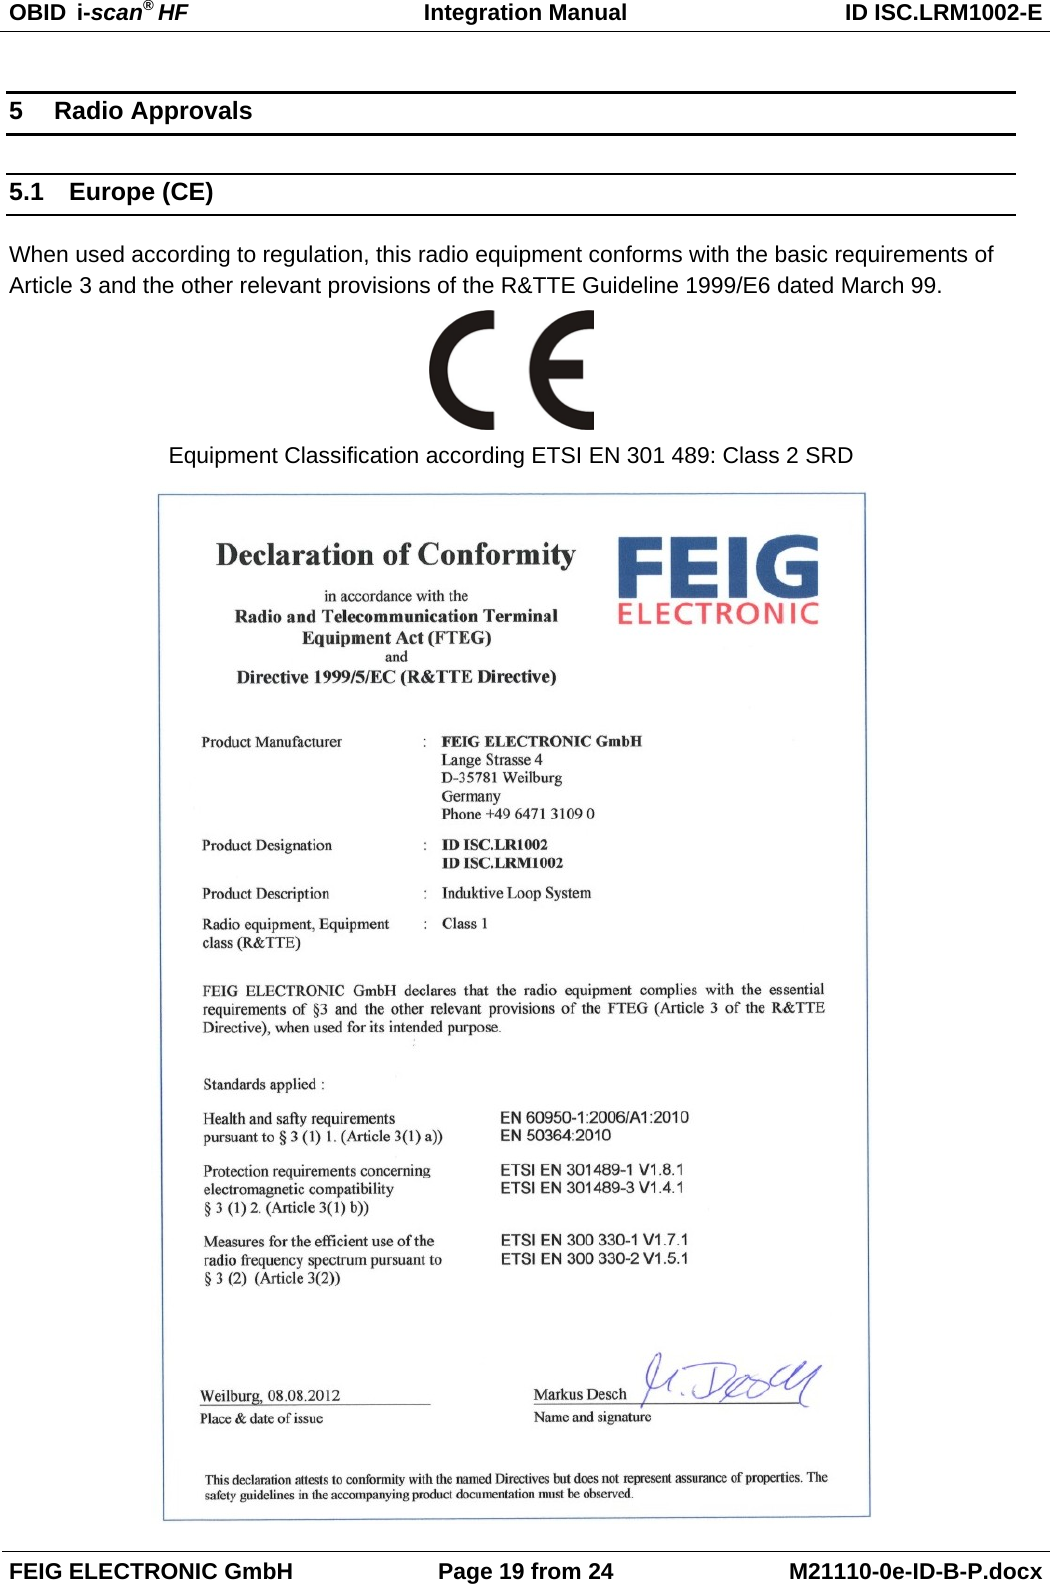 OBID  i-scan® HF Integration Manual ID ISC.LRM1002-E  FEIG ELECTRONIC GmbH Page 19 from 24 M21110-0e-ID-B-P.docx  5  Radio Approvals 5.1 Europe (CE) When used according to regulation, this radio equipment conforms with the basic requirements of Article 3 and the other relevant provisions of the R&amp;TTE Guideline 1999/E6 dated March 99.  Equipment Classification according ETSI EN 301 489: Class 2 SRD  